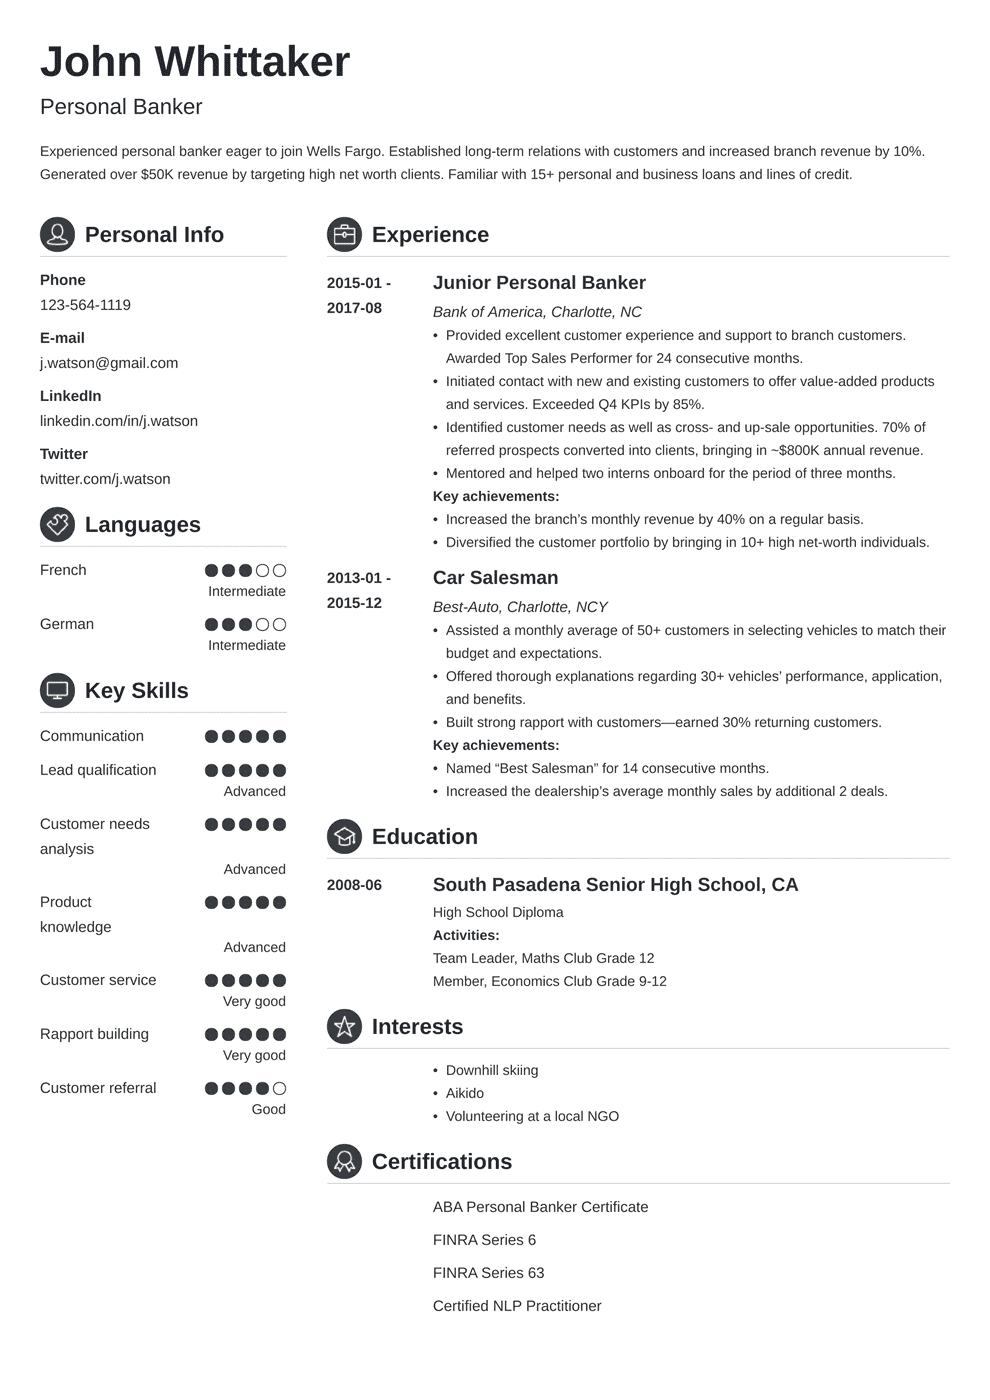 Personal Banker Resume: Sample and Writing Guide 20+ Examples